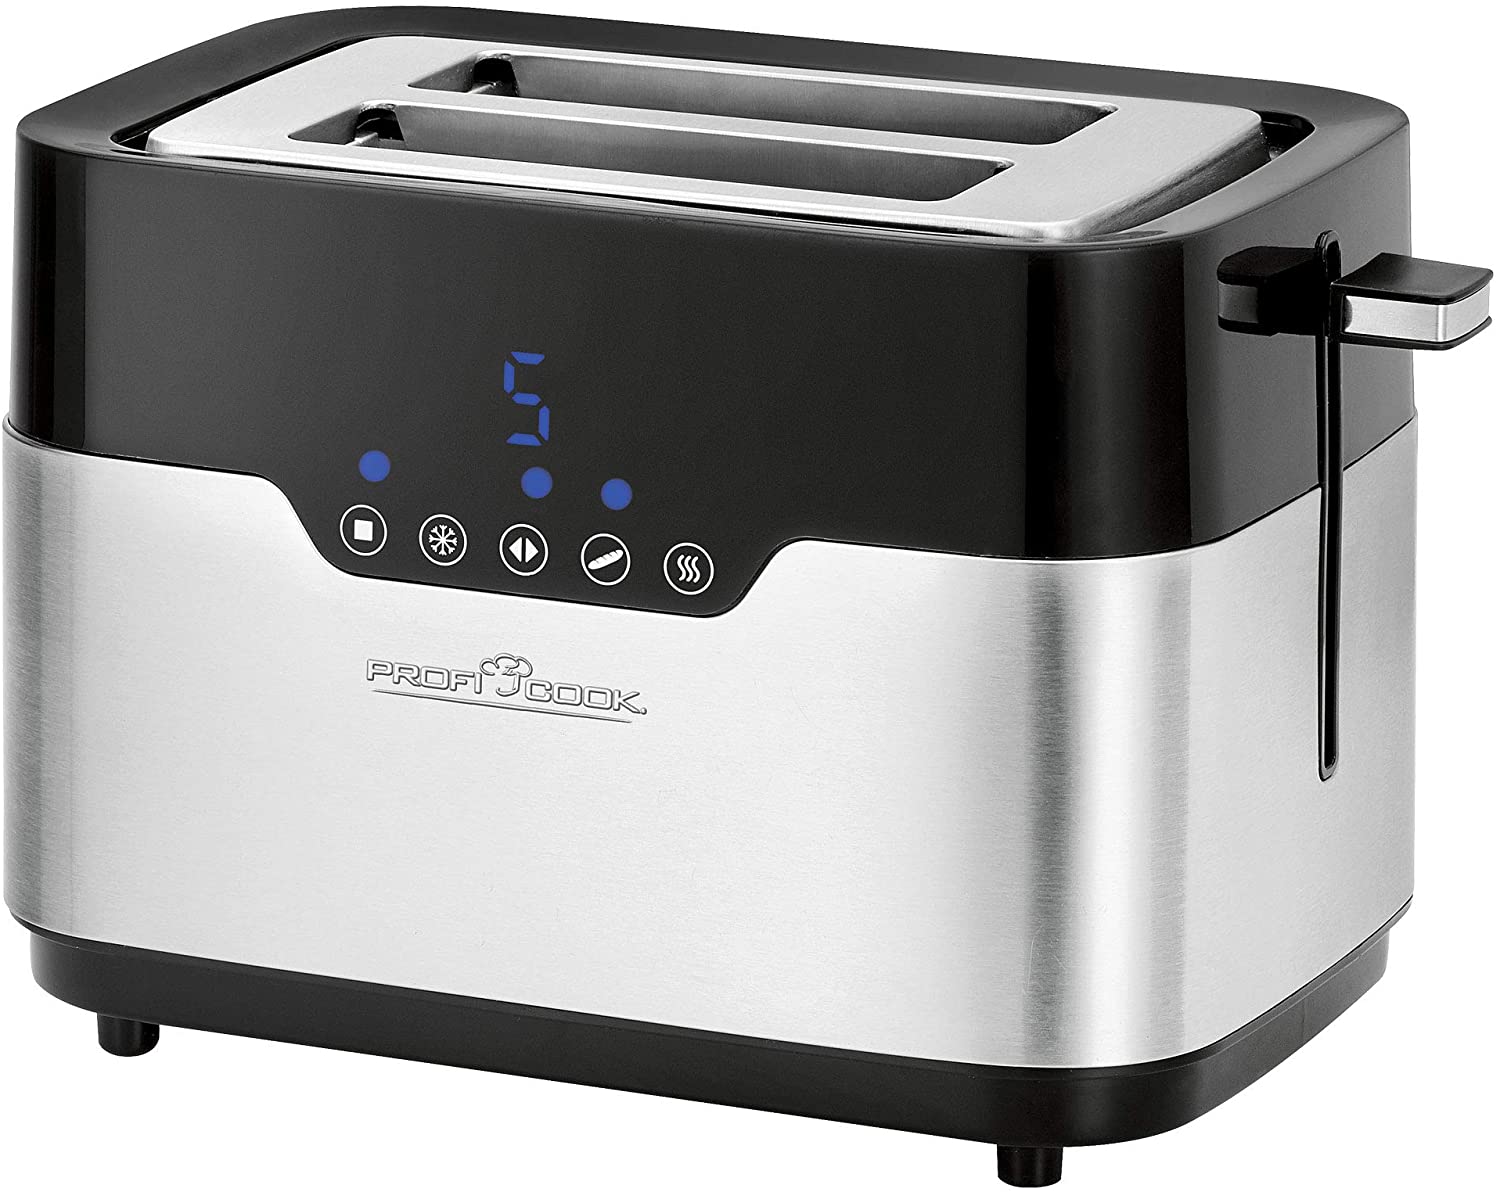 Profi Cook Toaster PC-TA 1170, Sensor Touch, Bun Attachment, Crumb Drawer, Centre Function, 7 Browning Levels, Stainless Steel Black